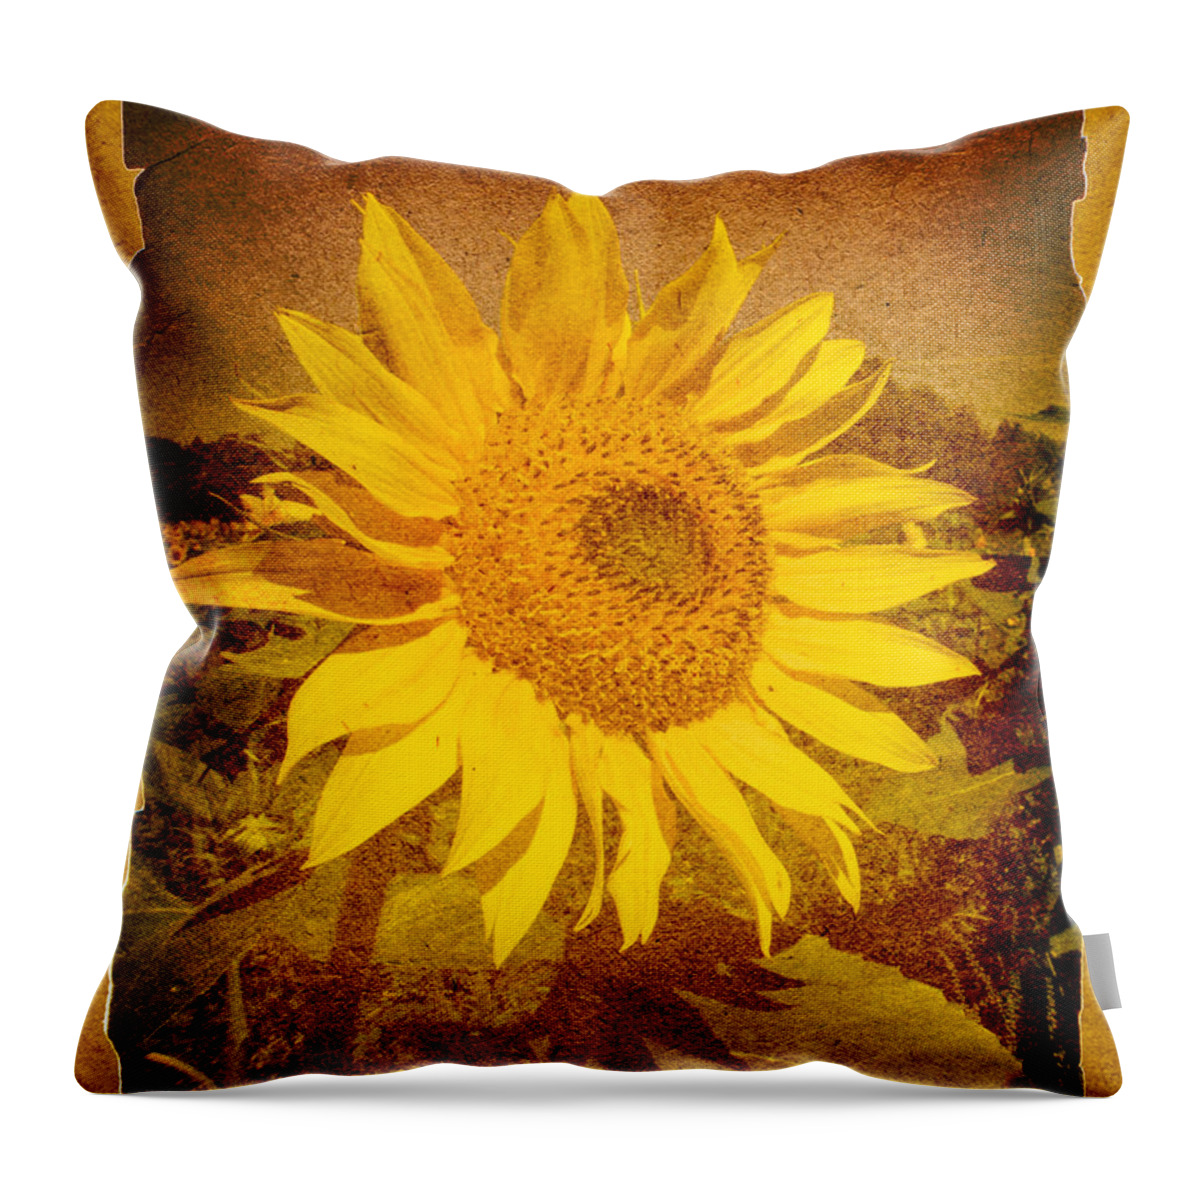 Flower Throw Pillow featuring the photograph Of Sunflowers Past by Bob Orsillo